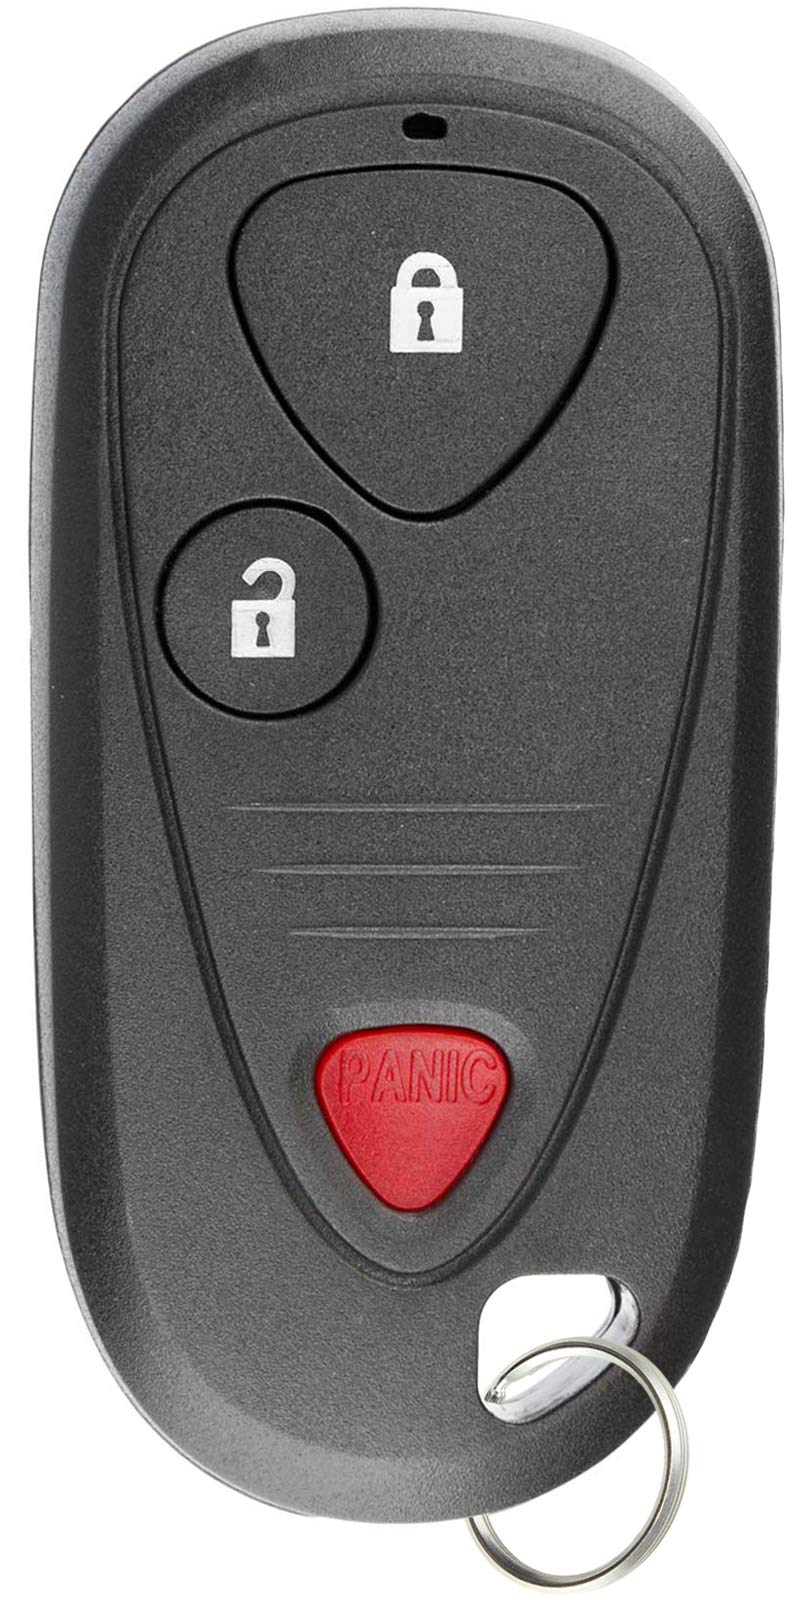  [AUSTRALIA] - KeylessOption Keyless Entry Remote Control Car Key Fob Replacement for OUCG8D-355H-A